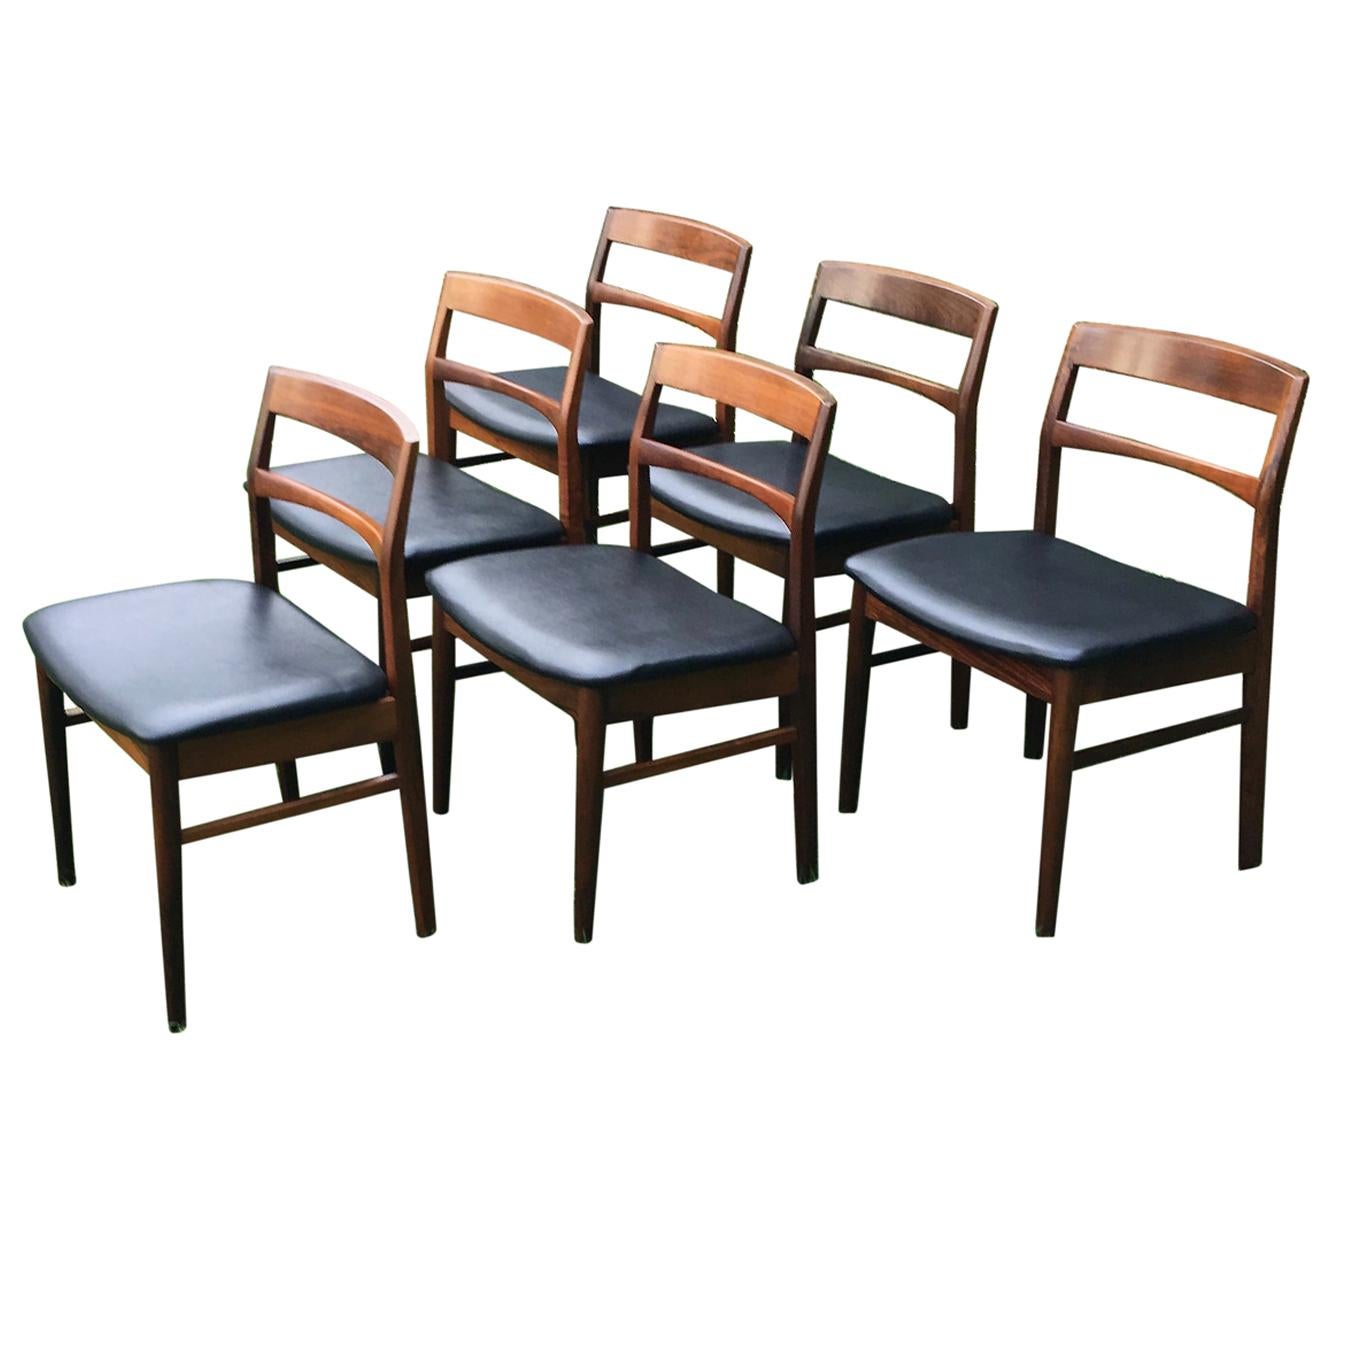 Set of 6 Mid Century Danish Rosewood Dining Chairs by Henning Kjaernulf, 1960s